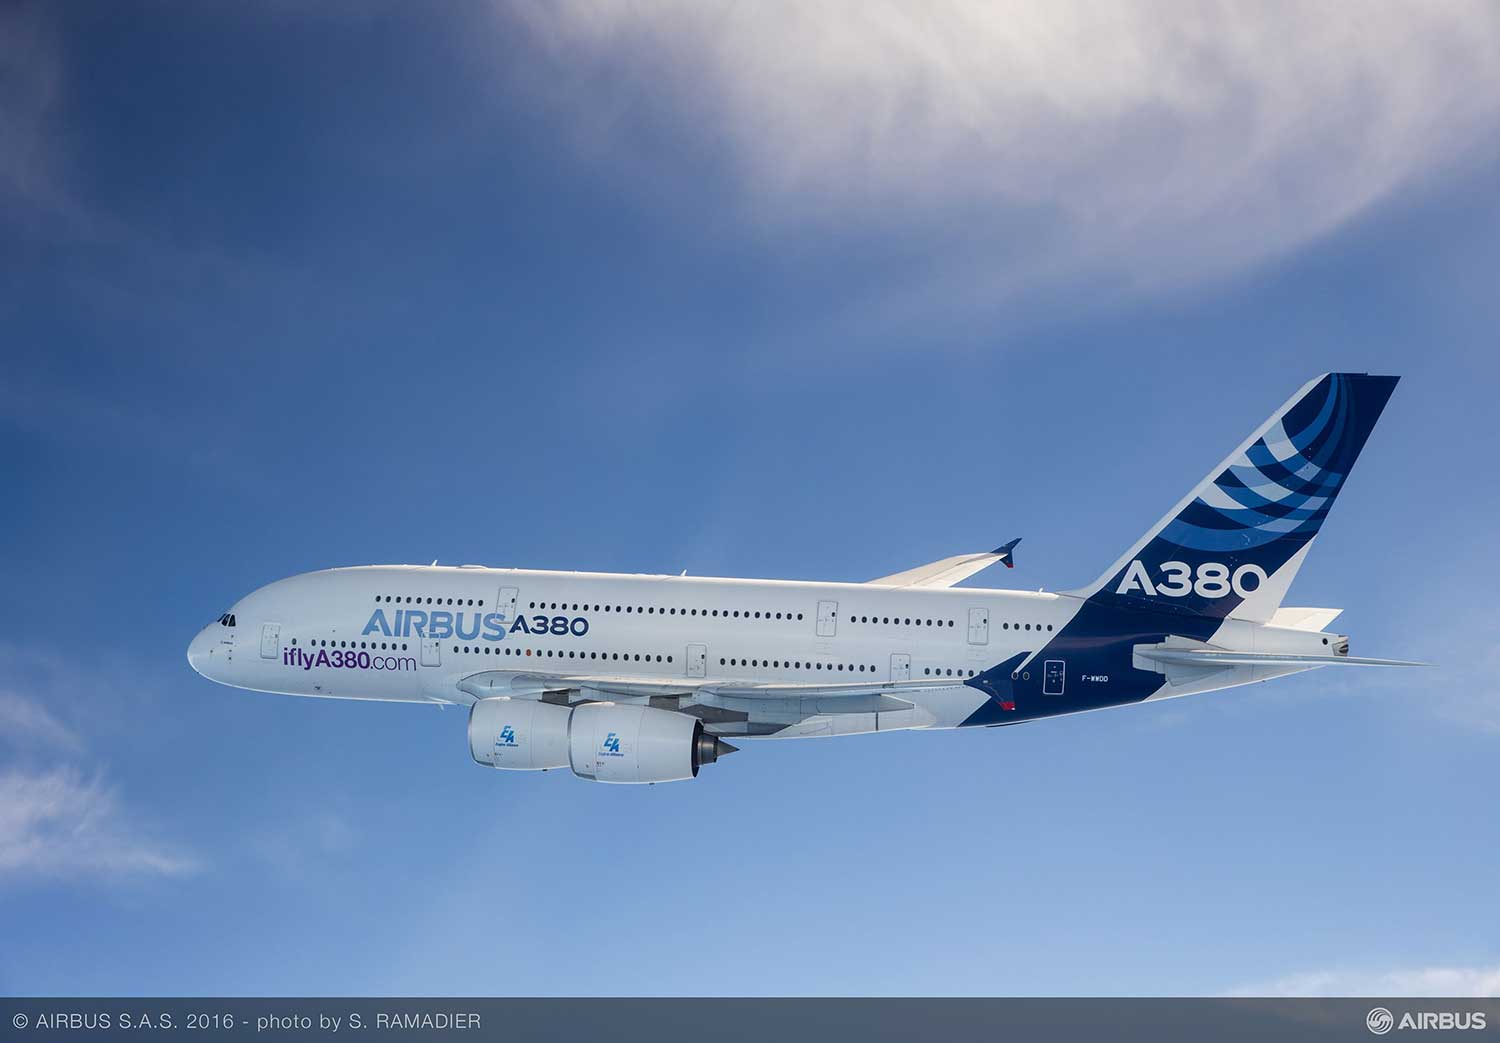 Airbus to Halt A380 Production